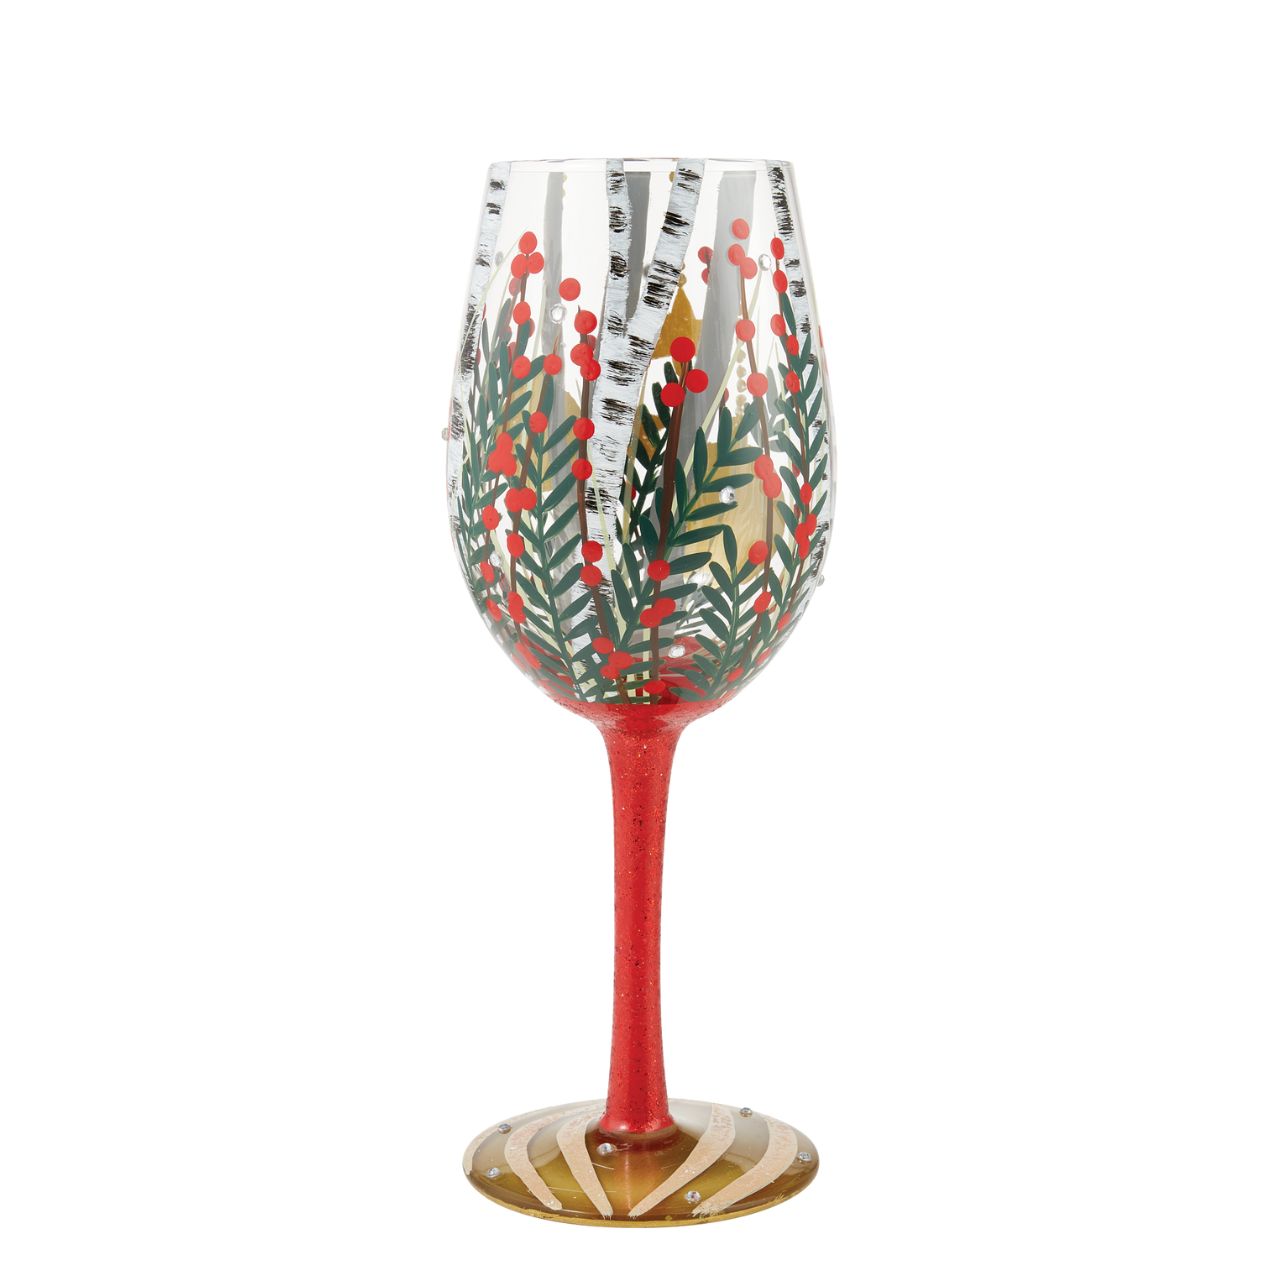 Visions of Christmas Birch Wine Glass by Lolita   Take a Christmas walk with our Visions of Birch Wine Glass by Lolita. Surrounded by beautifully decorated Christmas branches, a full red glittered stem and a gold Christmas bauble on the bottom of the glass this wine glass radiates Christmas all year round.